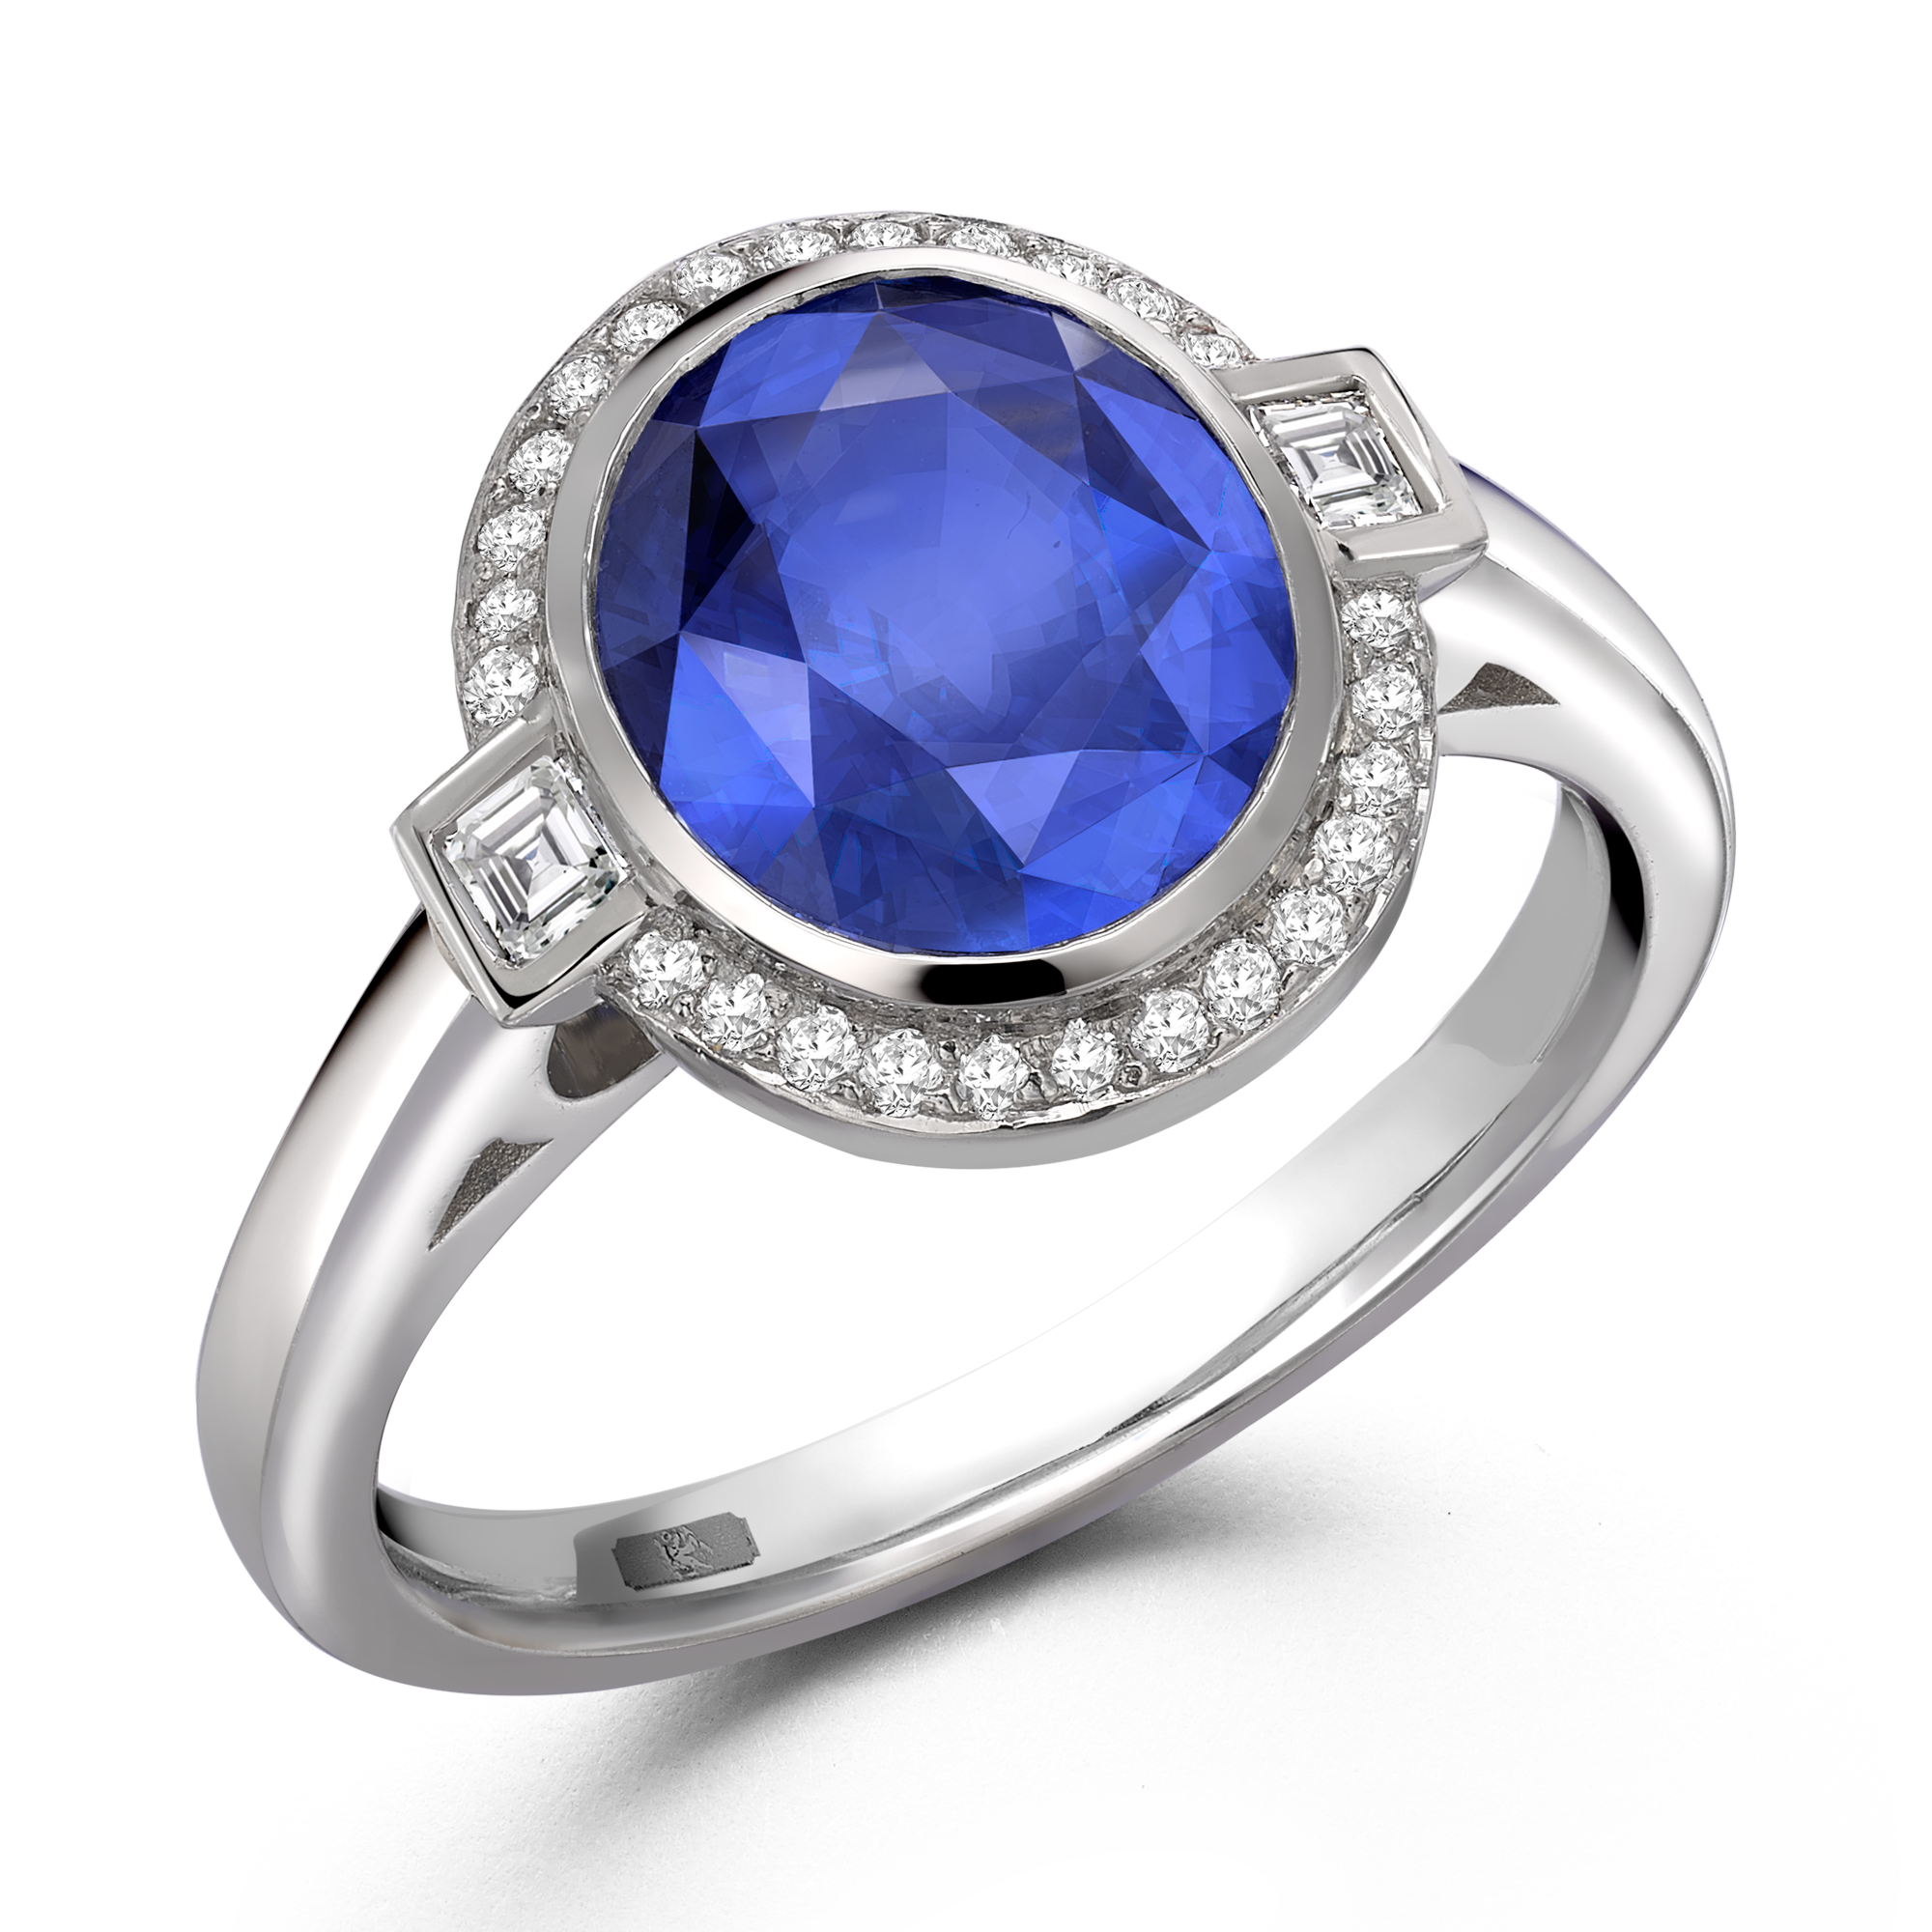 Oval Cut 4.09ct Sapphire and Diamond Cluster Ring Oval Cut, Rubover Set_1